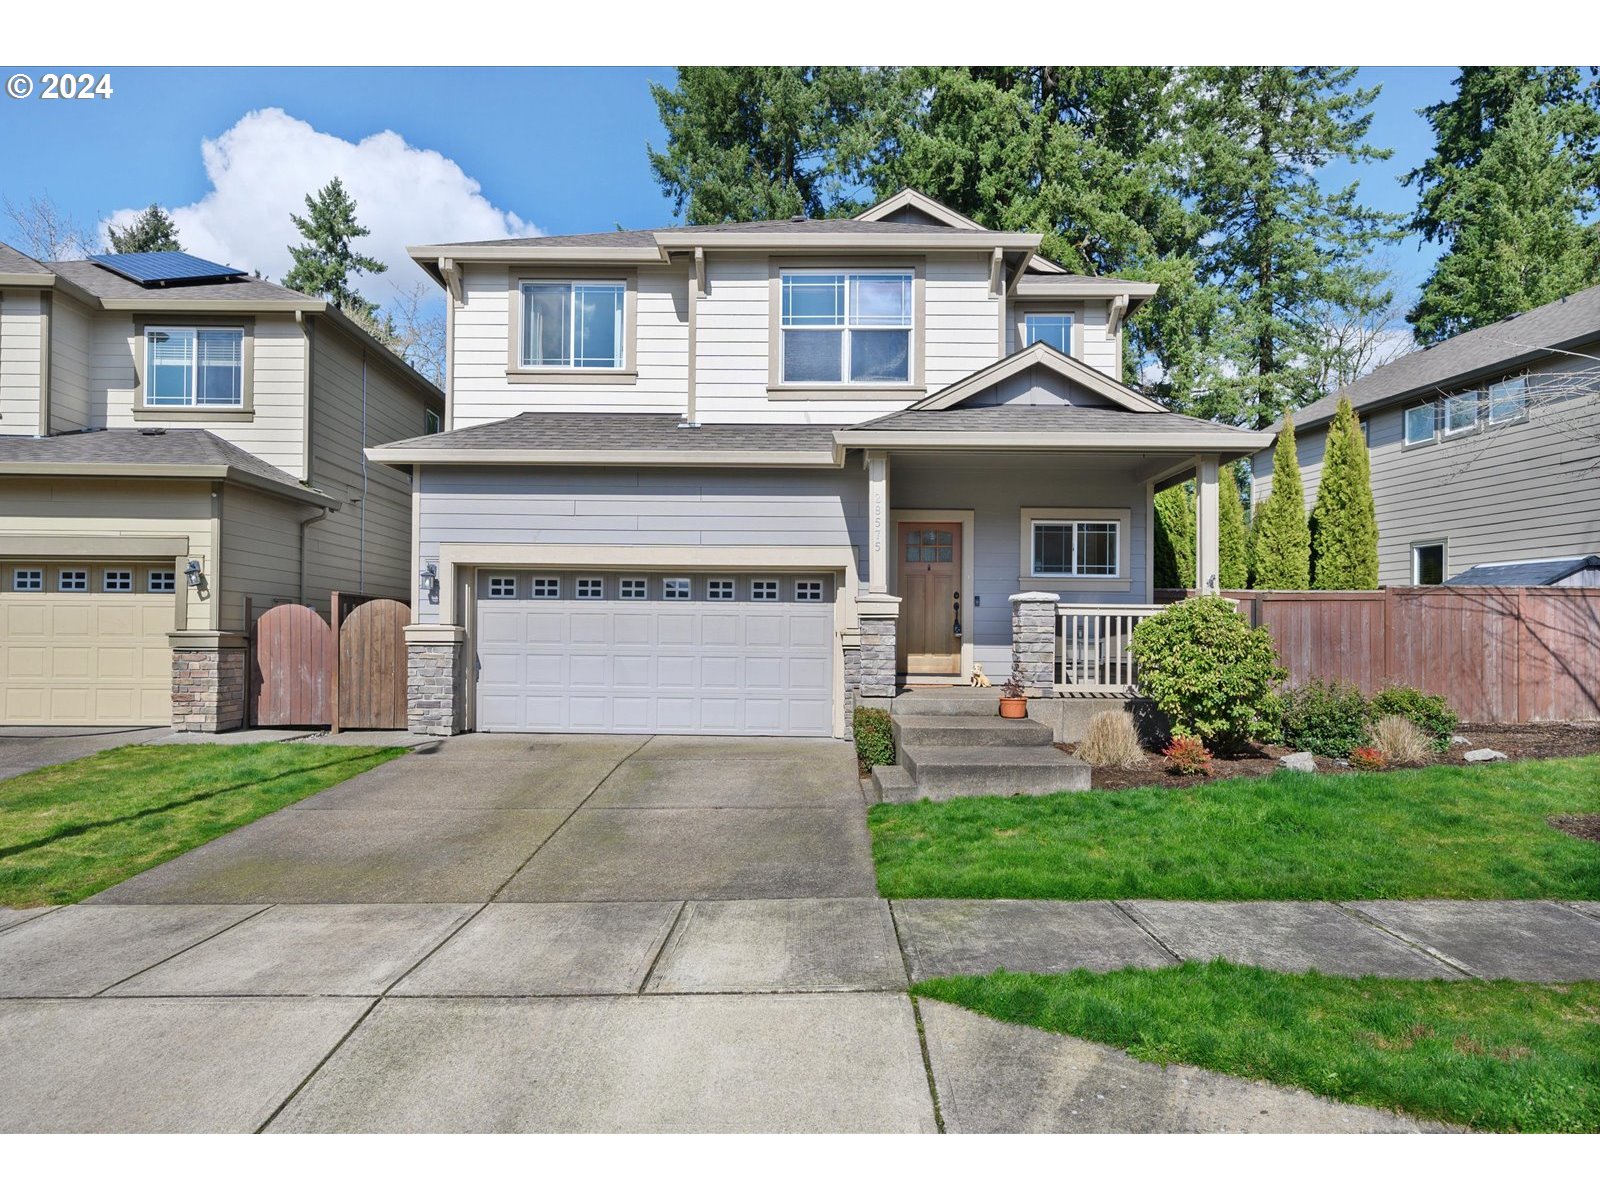 28575 GREENWAY DR, Wilsonville, OR 